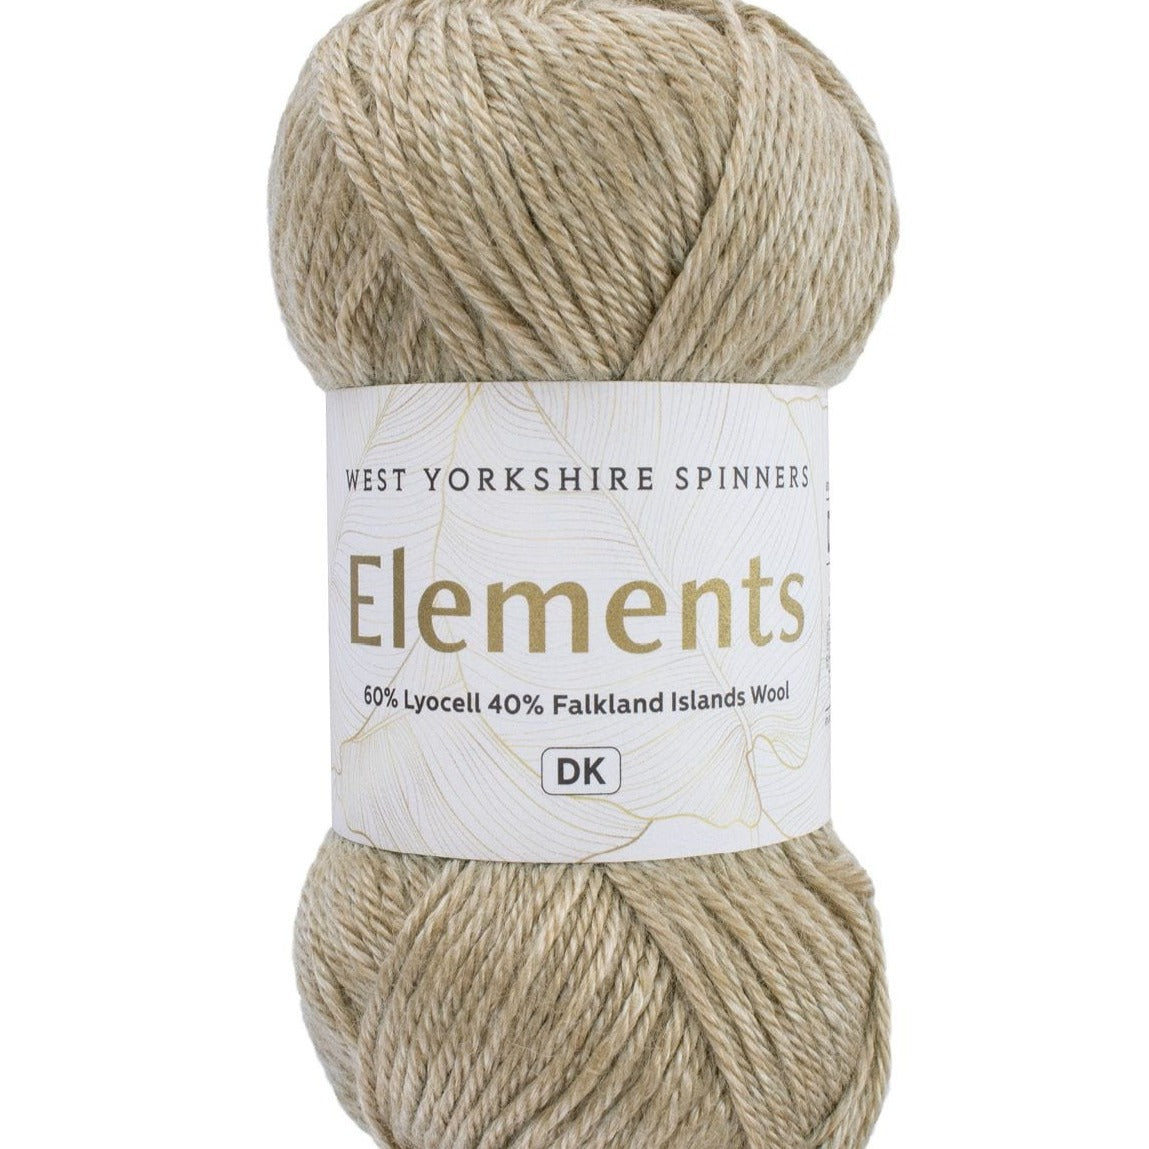 West Yorkshire Spinners Yarn Golden Sands (1099) West Yorkshire Spinners Elements DK Yarn